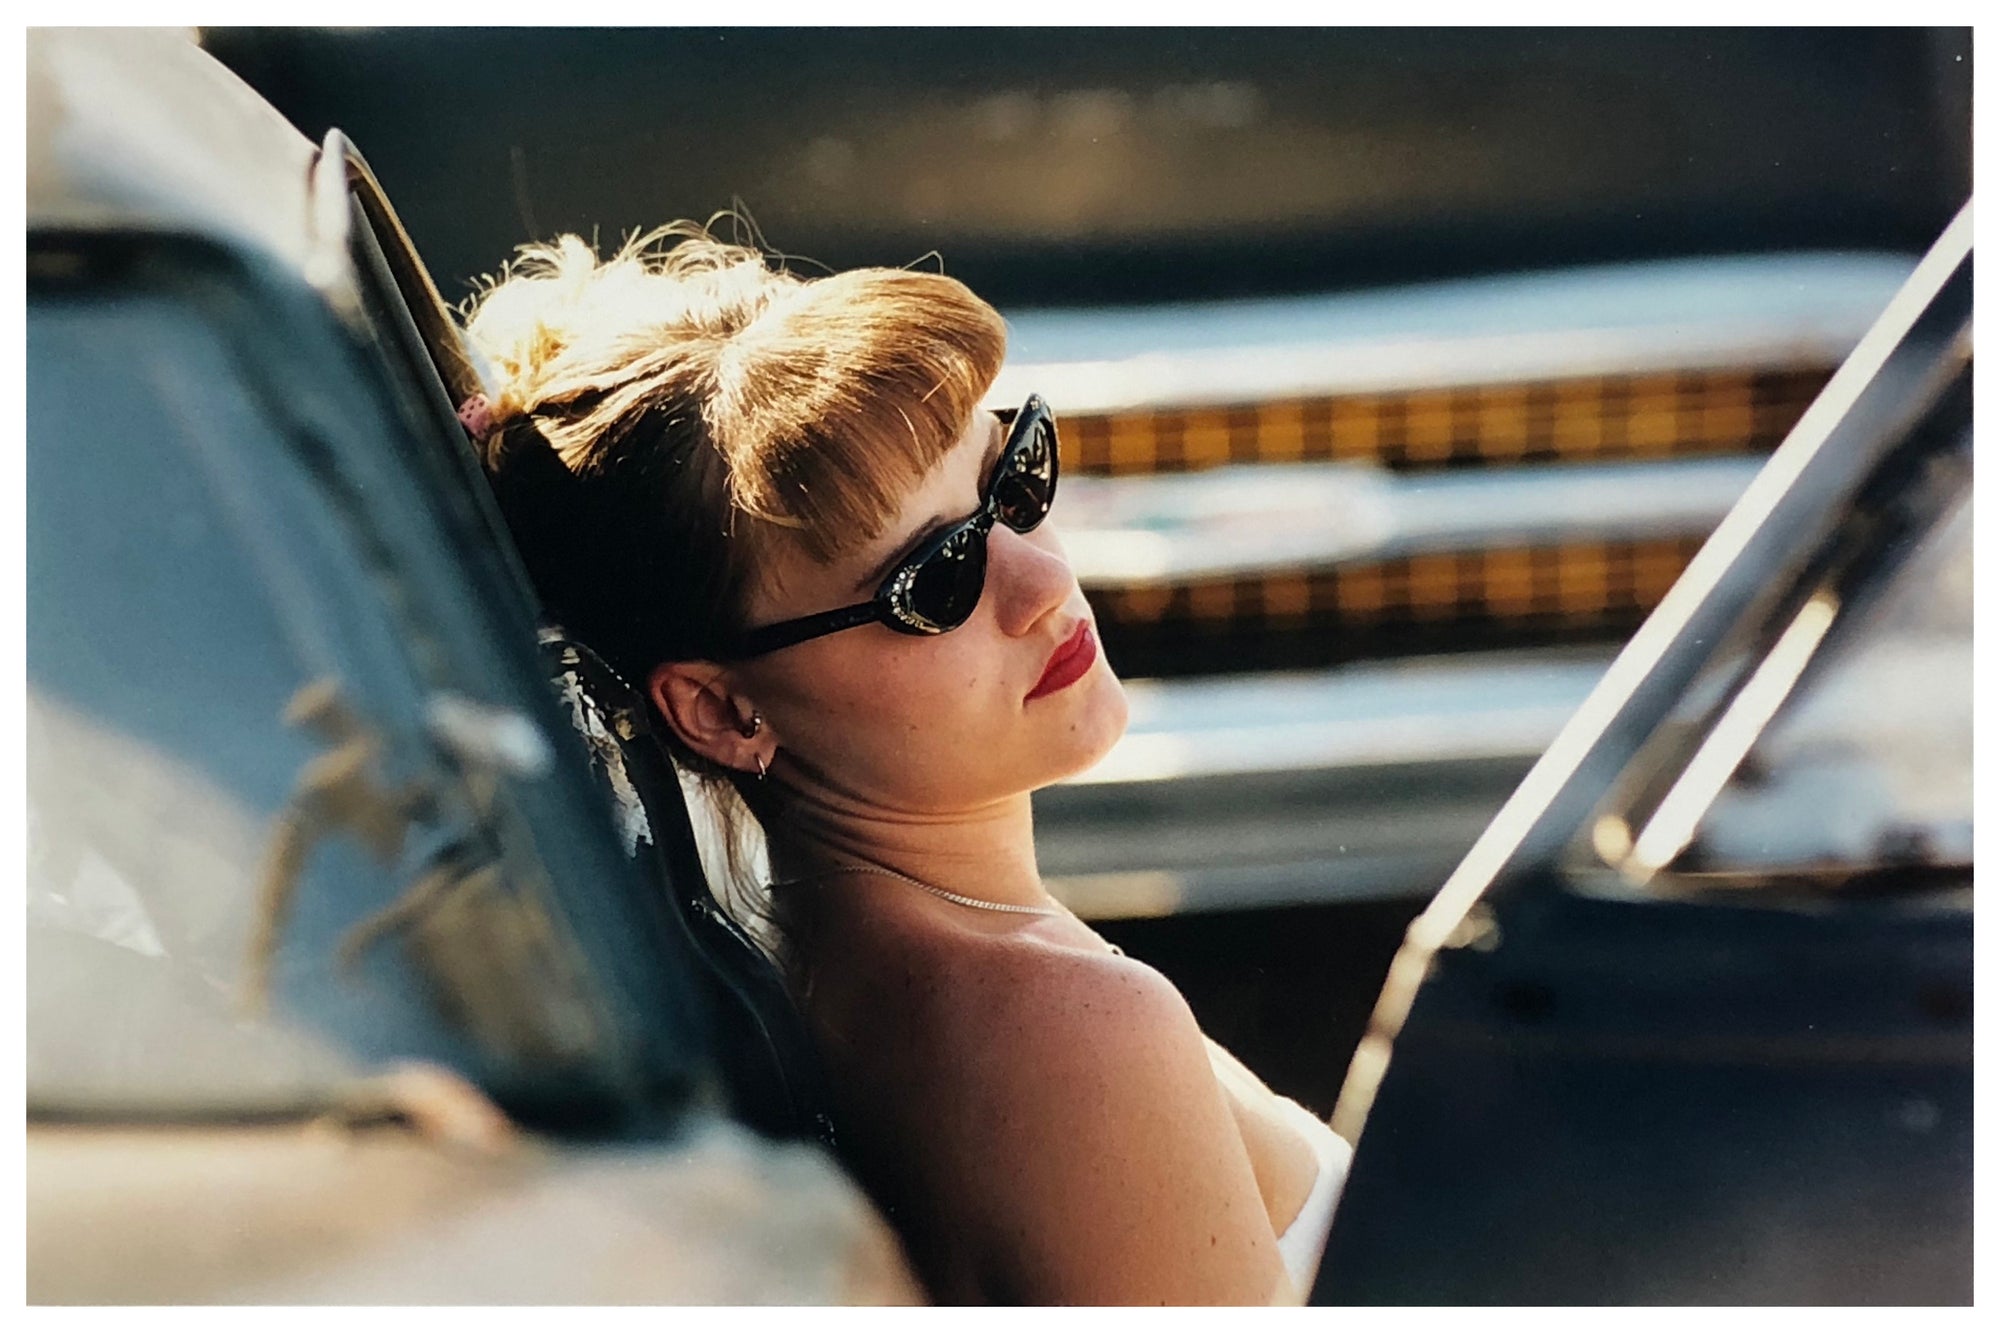 Photograph by Richard Heeps.  A woman rests on the side of a car.